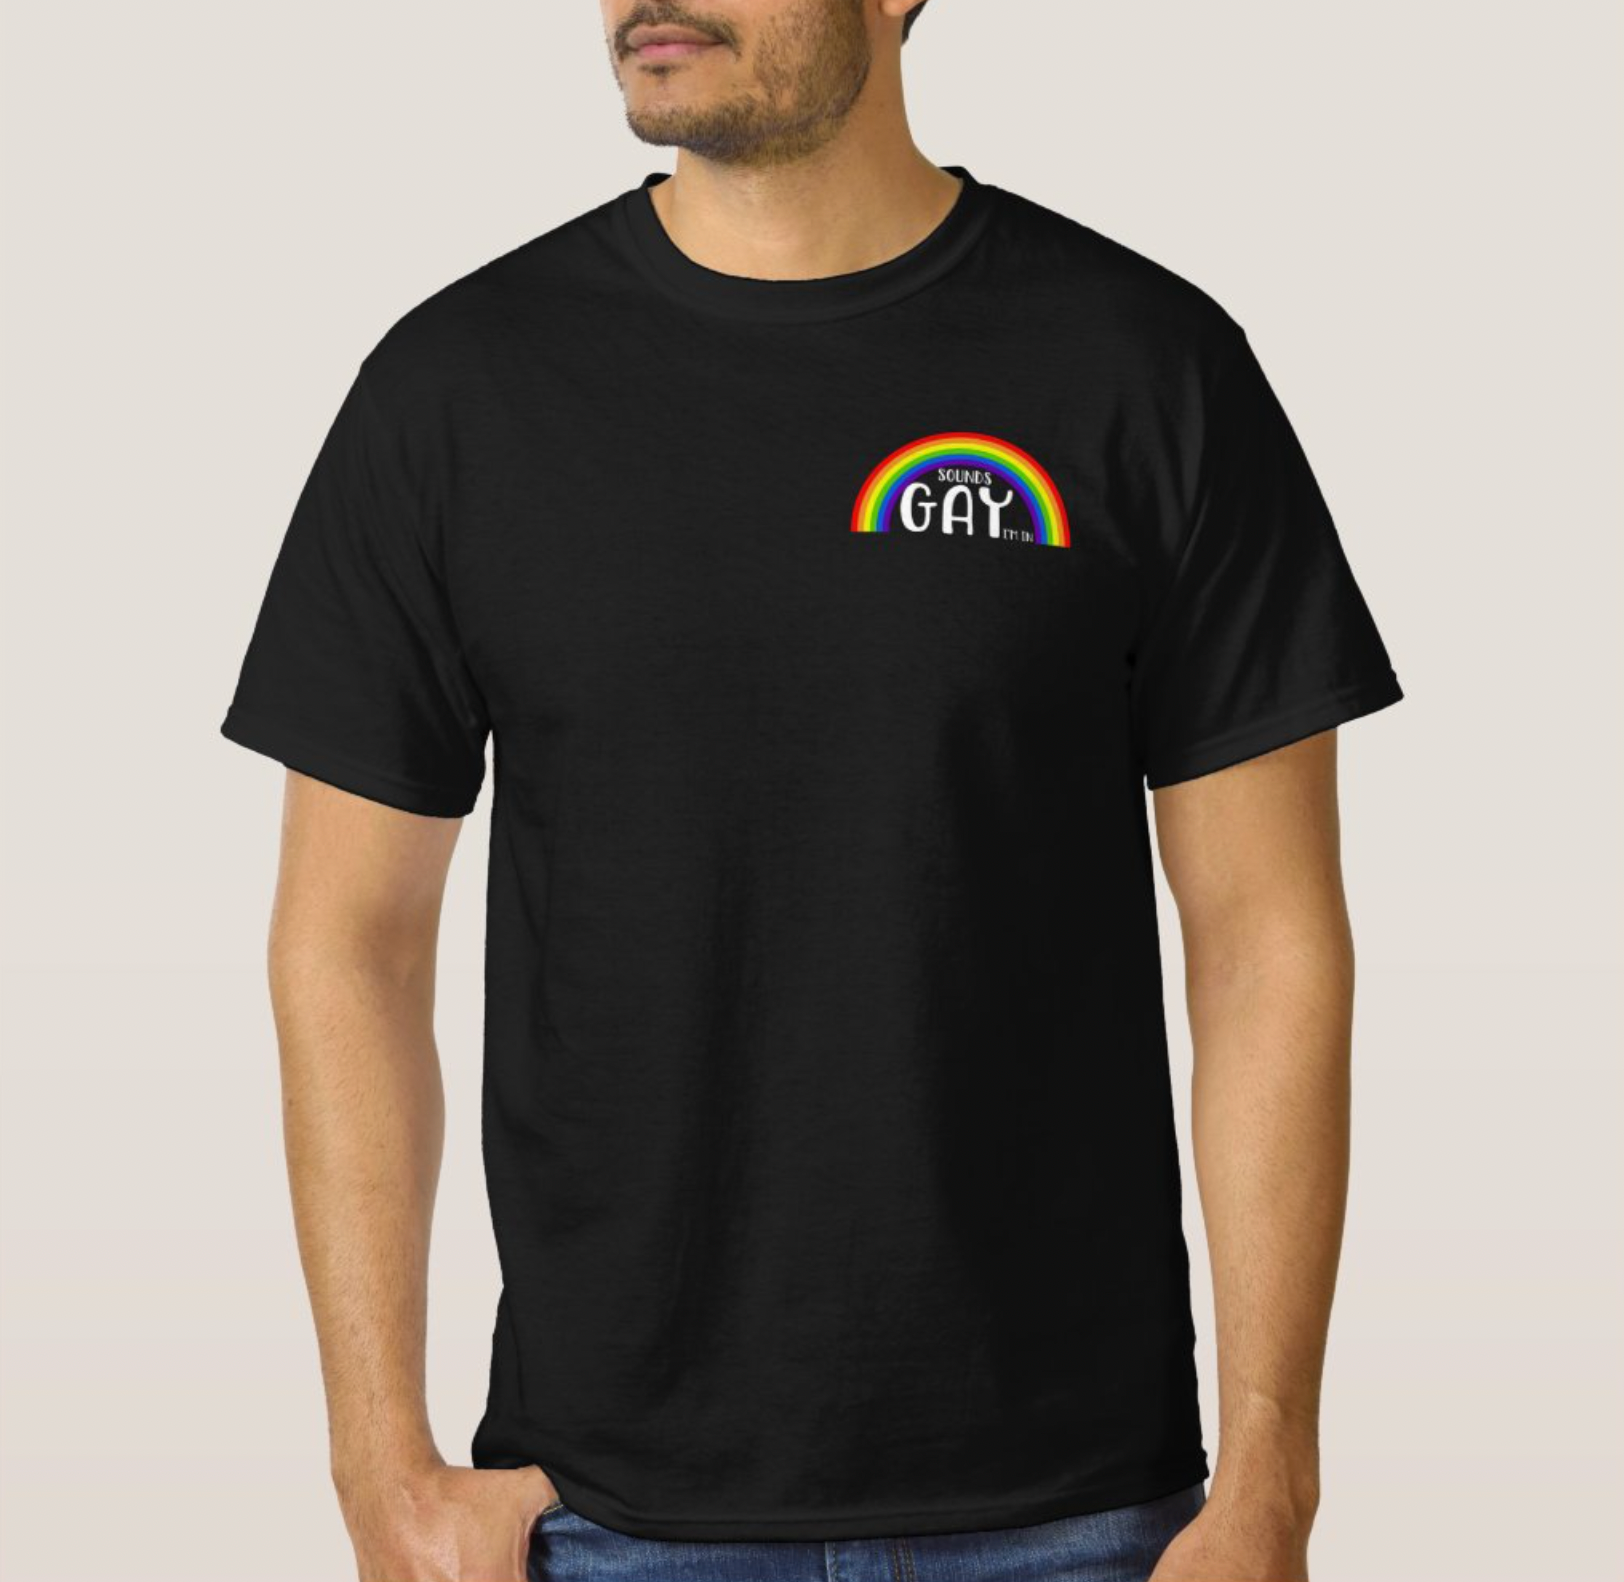 'Sounds Gay I'm In' Rainbow Shirt - 42.99 with free shipping on Gays+ Store 